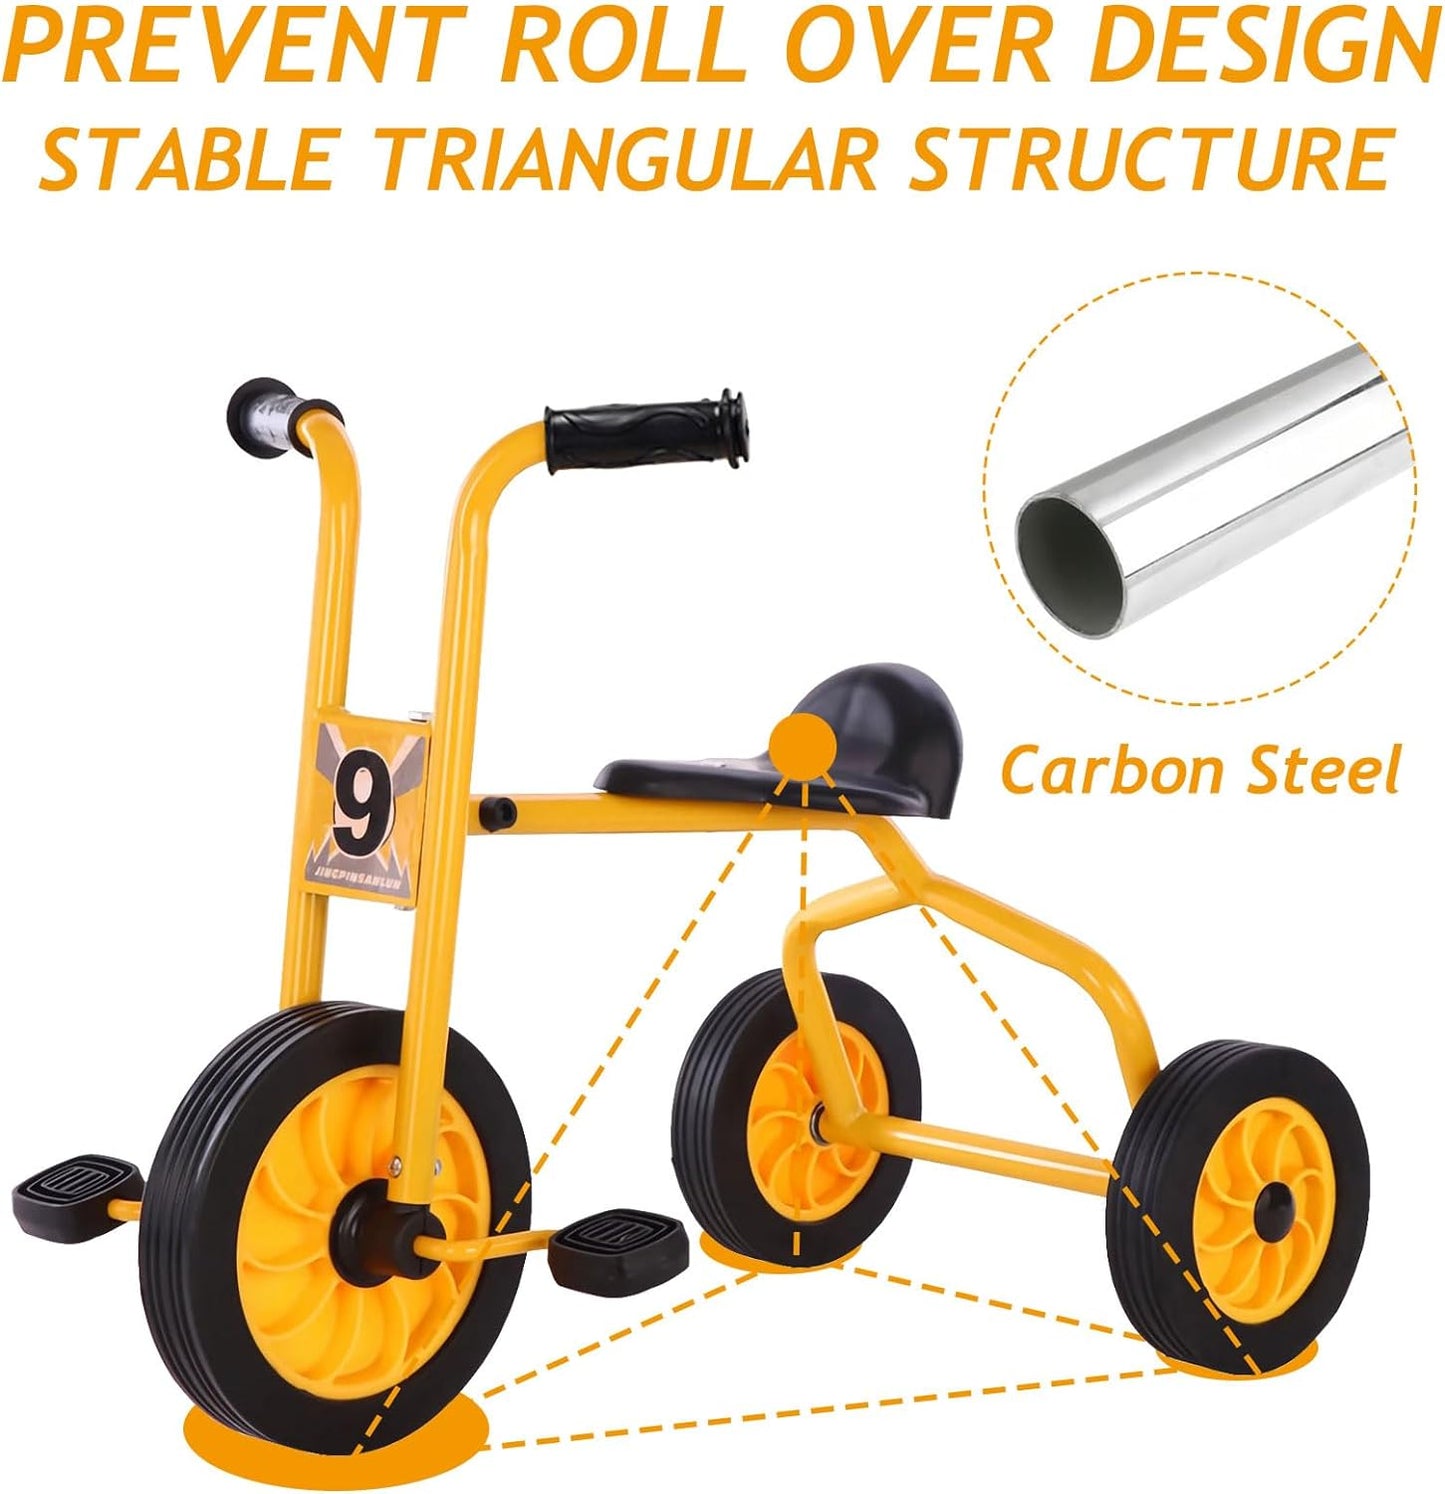 Kids Tricycle for Rider Age 2+,Kids Trike with Inflation-Free Wheels,Preschool Daycare Kids Pedal Bike,Kids Outdoor Play Equipment,Trikes for Toddlers,Carbon Steel Frame